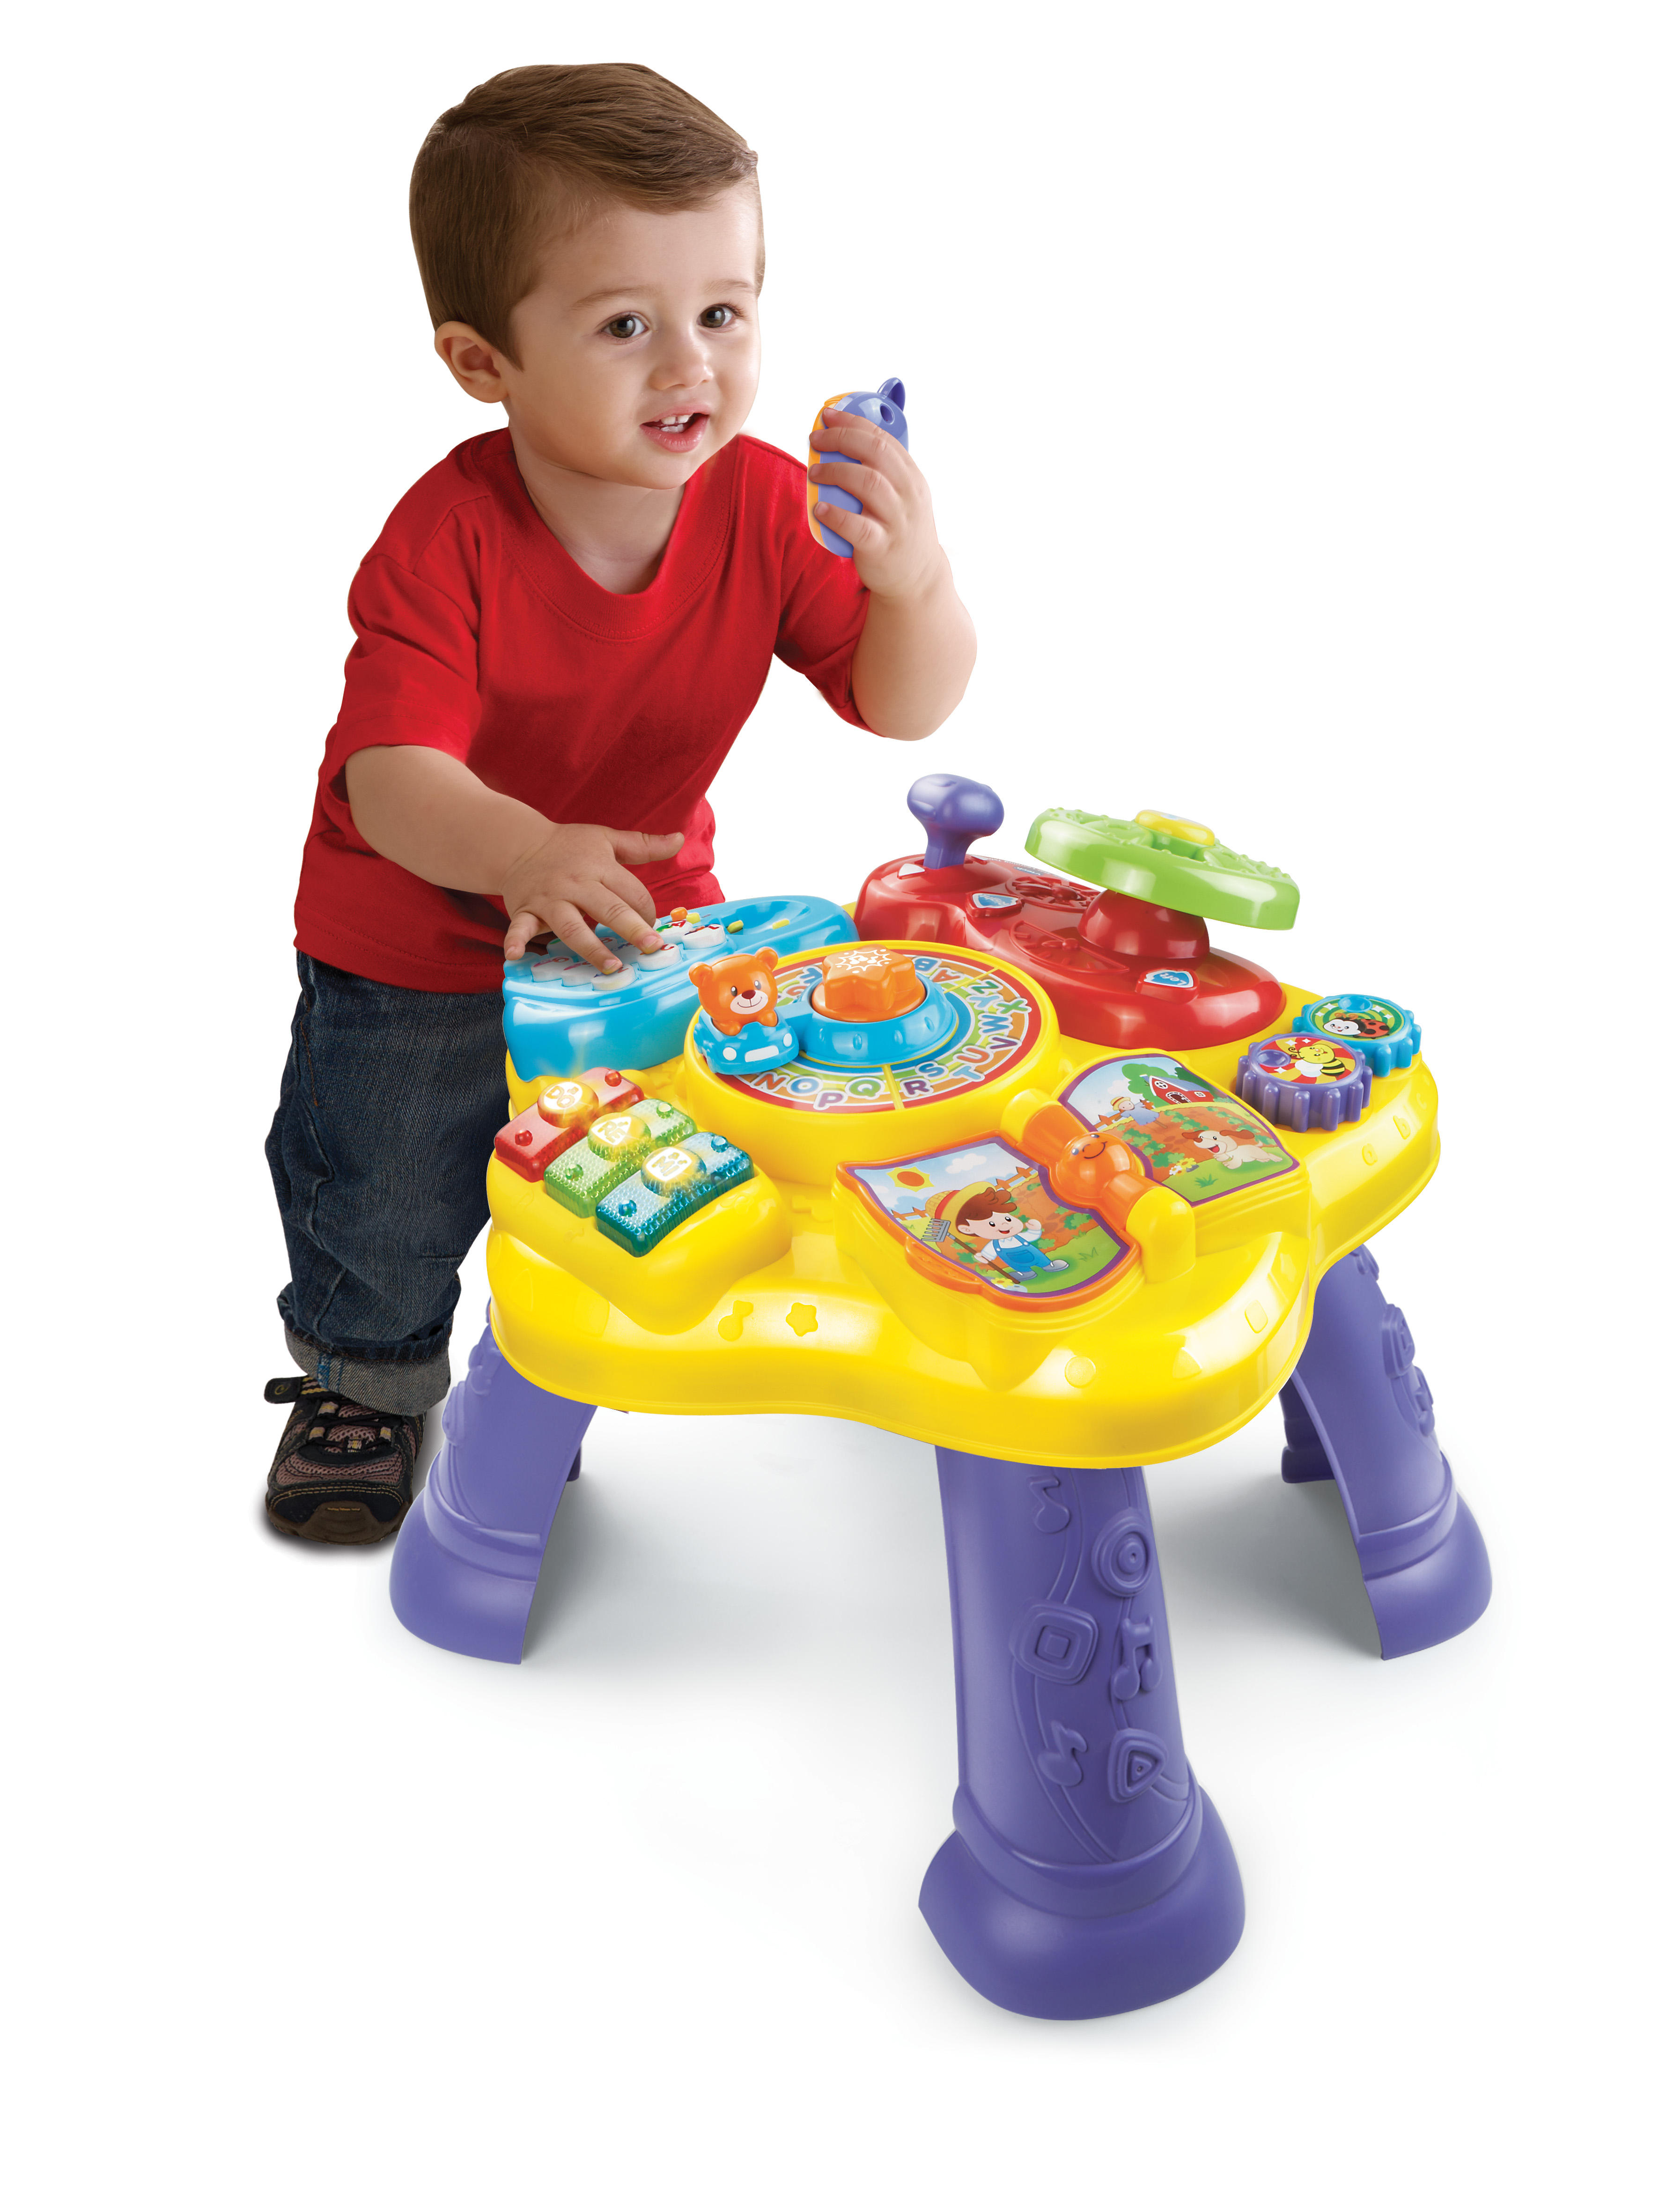 Magic Star Learning Table VTech - image 4 of 11